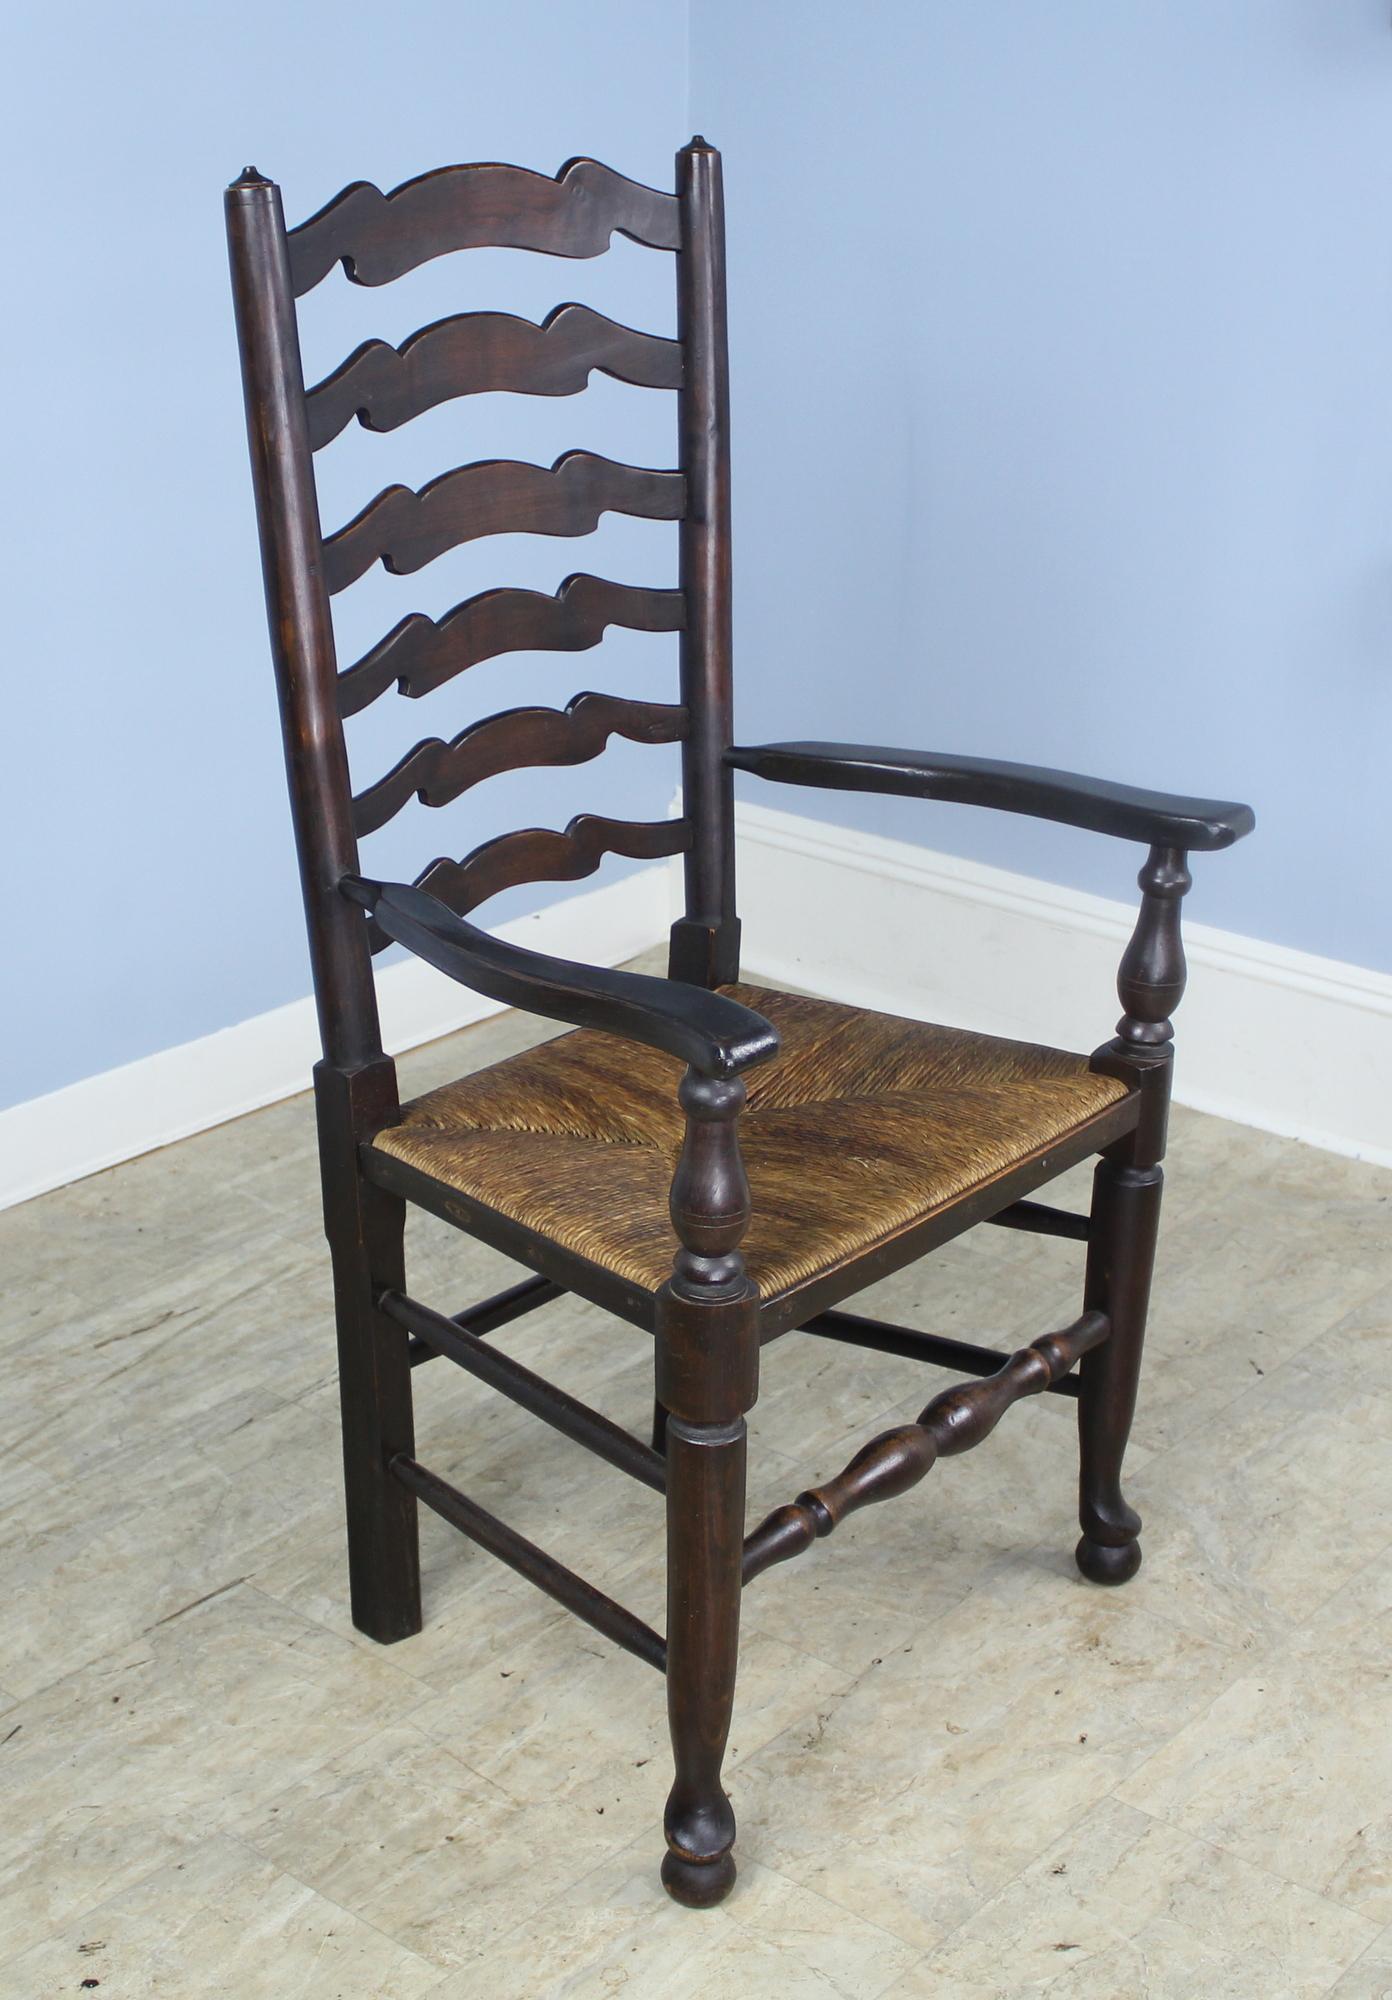 An elegant country look. Set of one arm and seven side English wavy back ladder chairs in dark oak. The rush is in good antique condition, and the chairs are quite comfortable as the backs have a slight recline. A marriage of two sets, these chairs